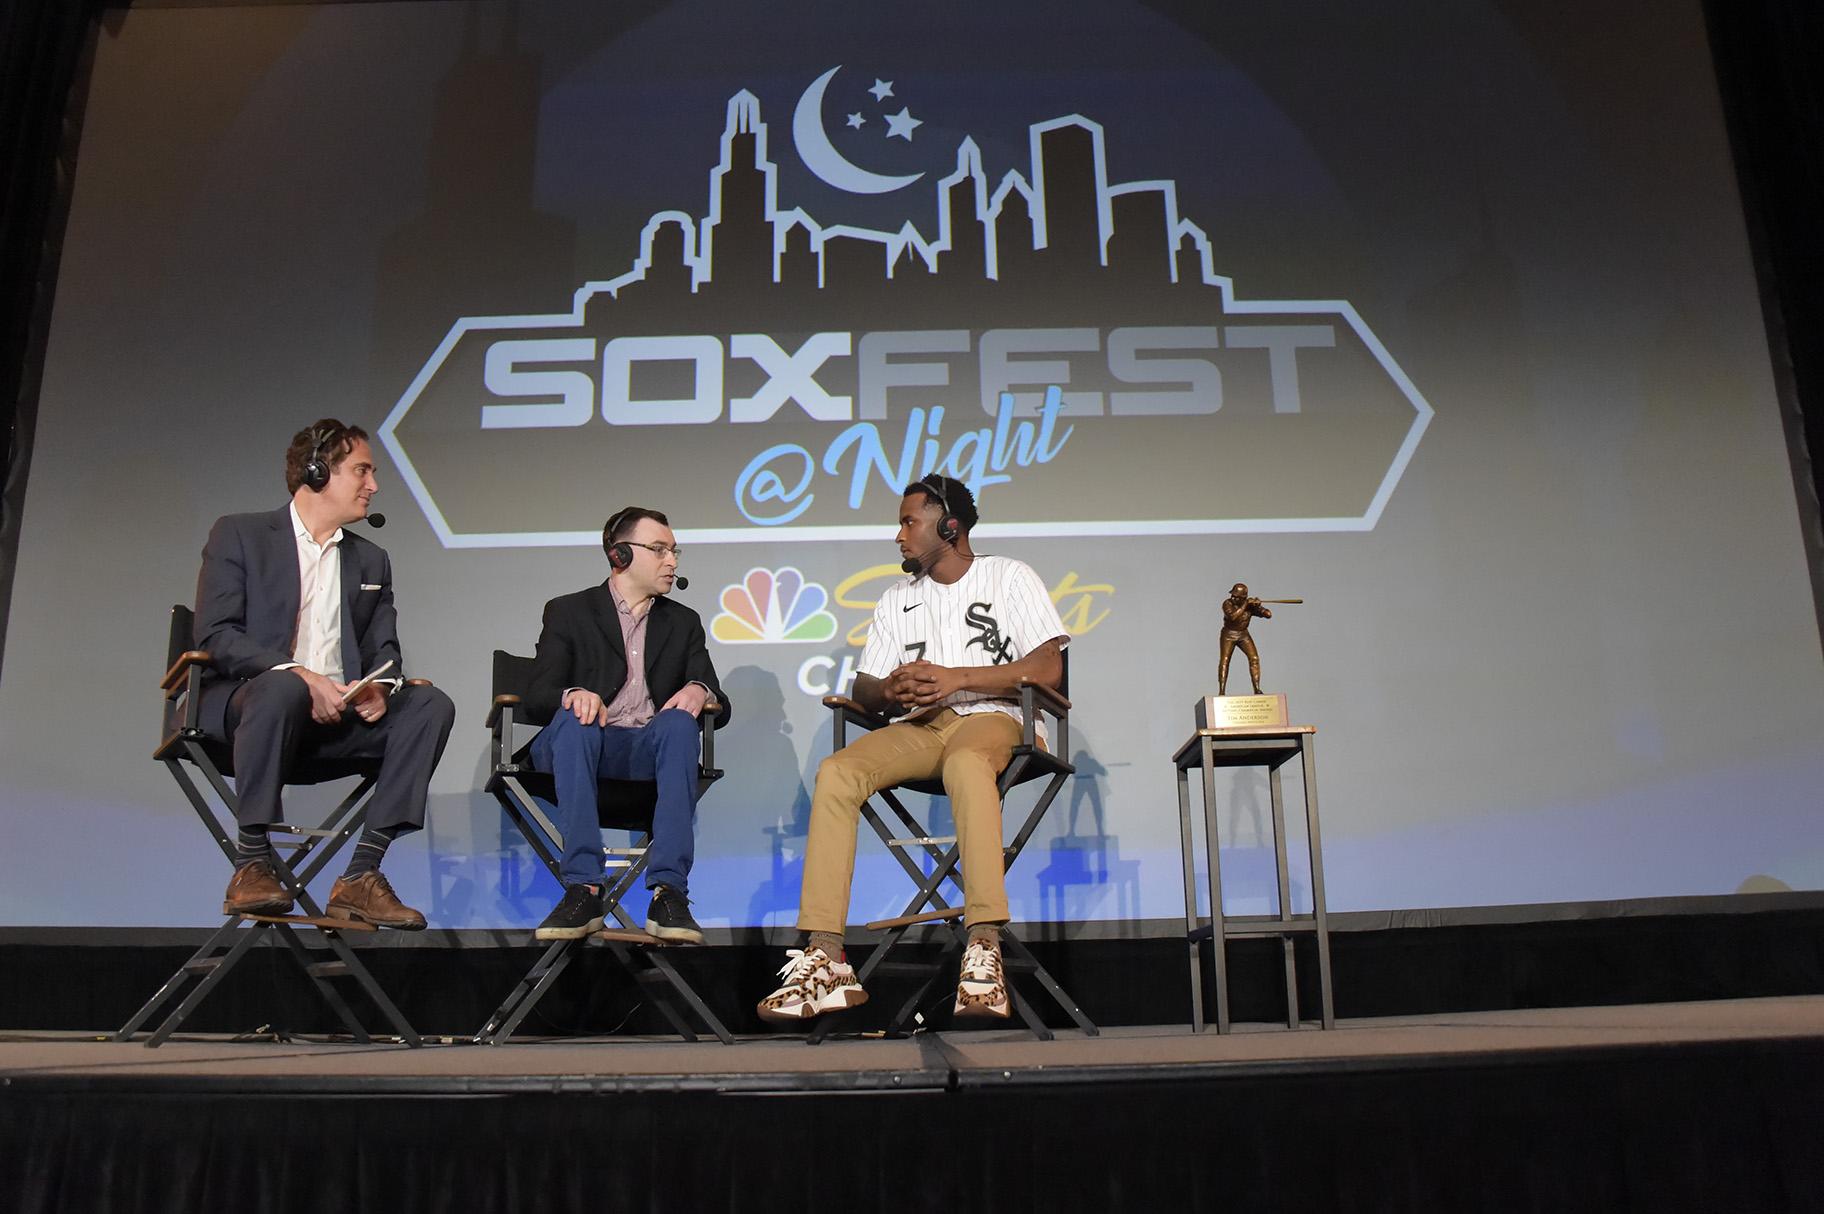 White Sox broadcaster Jason Benetti, center, talks with 2019 American League Batting Champion Tim Anderson, right at SoxFest 2020. Also pictured: Chuck Garfien of NBC Sports Chicago. (Courtesy Chicago White Sox / Ron Vesely)